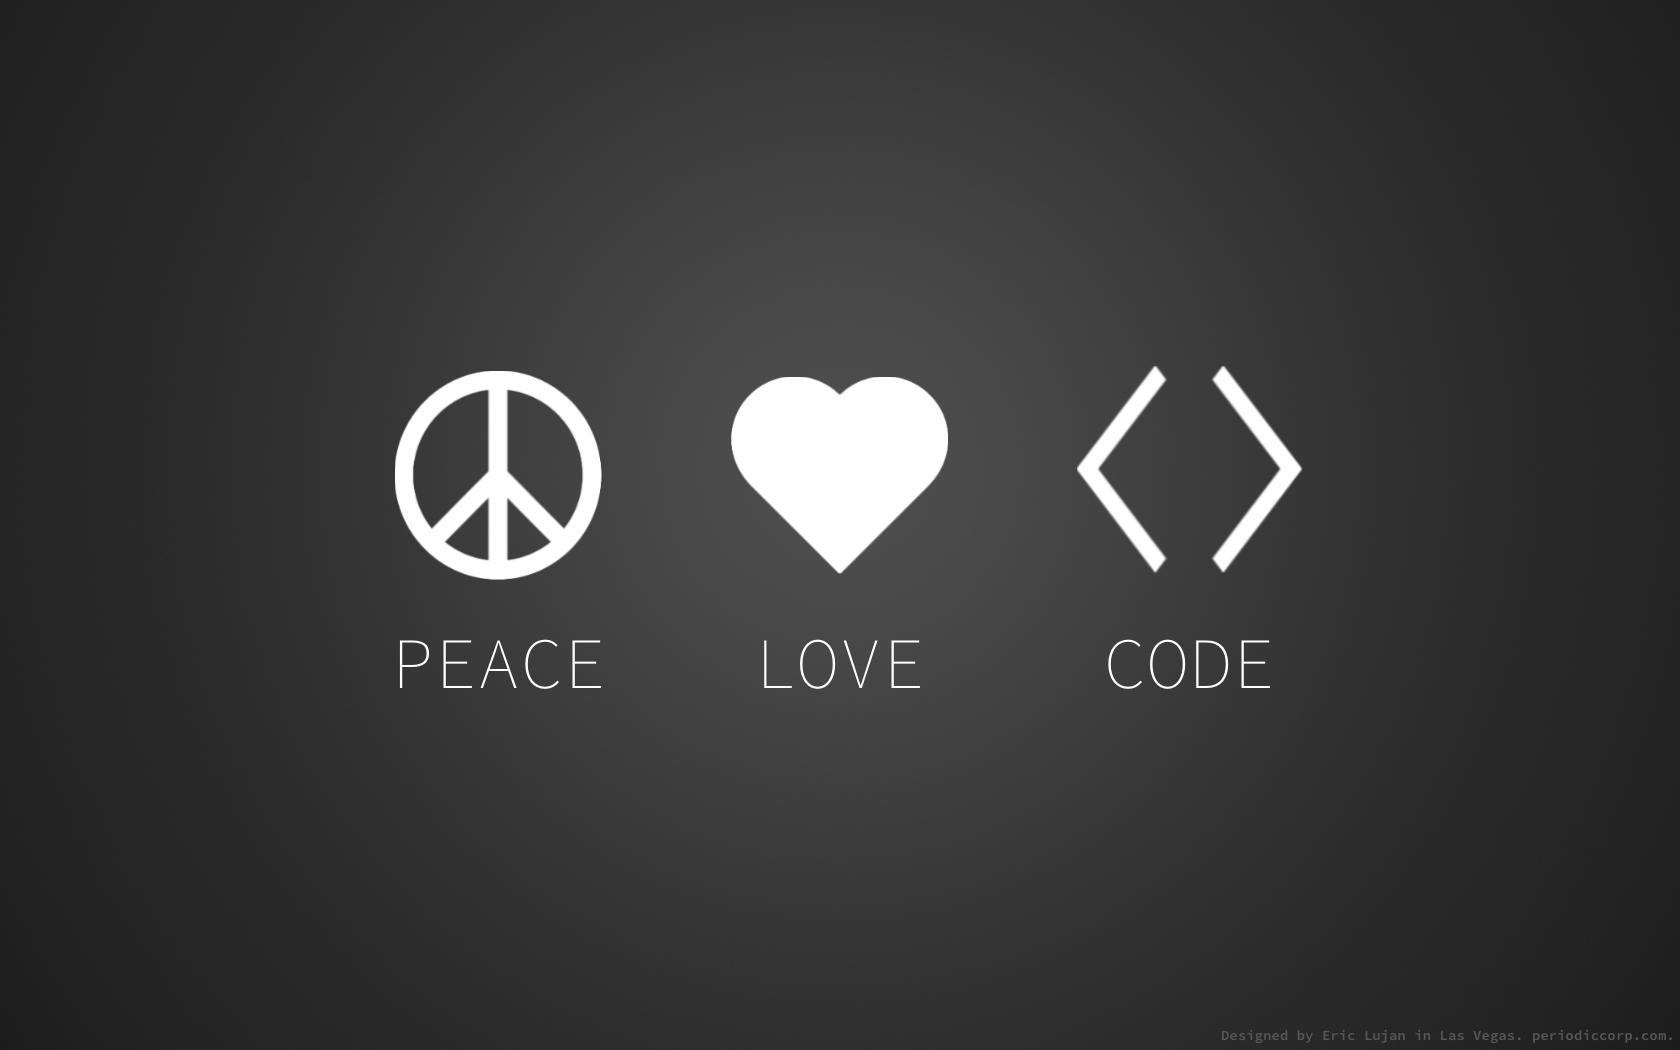 Introducing the Peace, Love, Code wallpaper